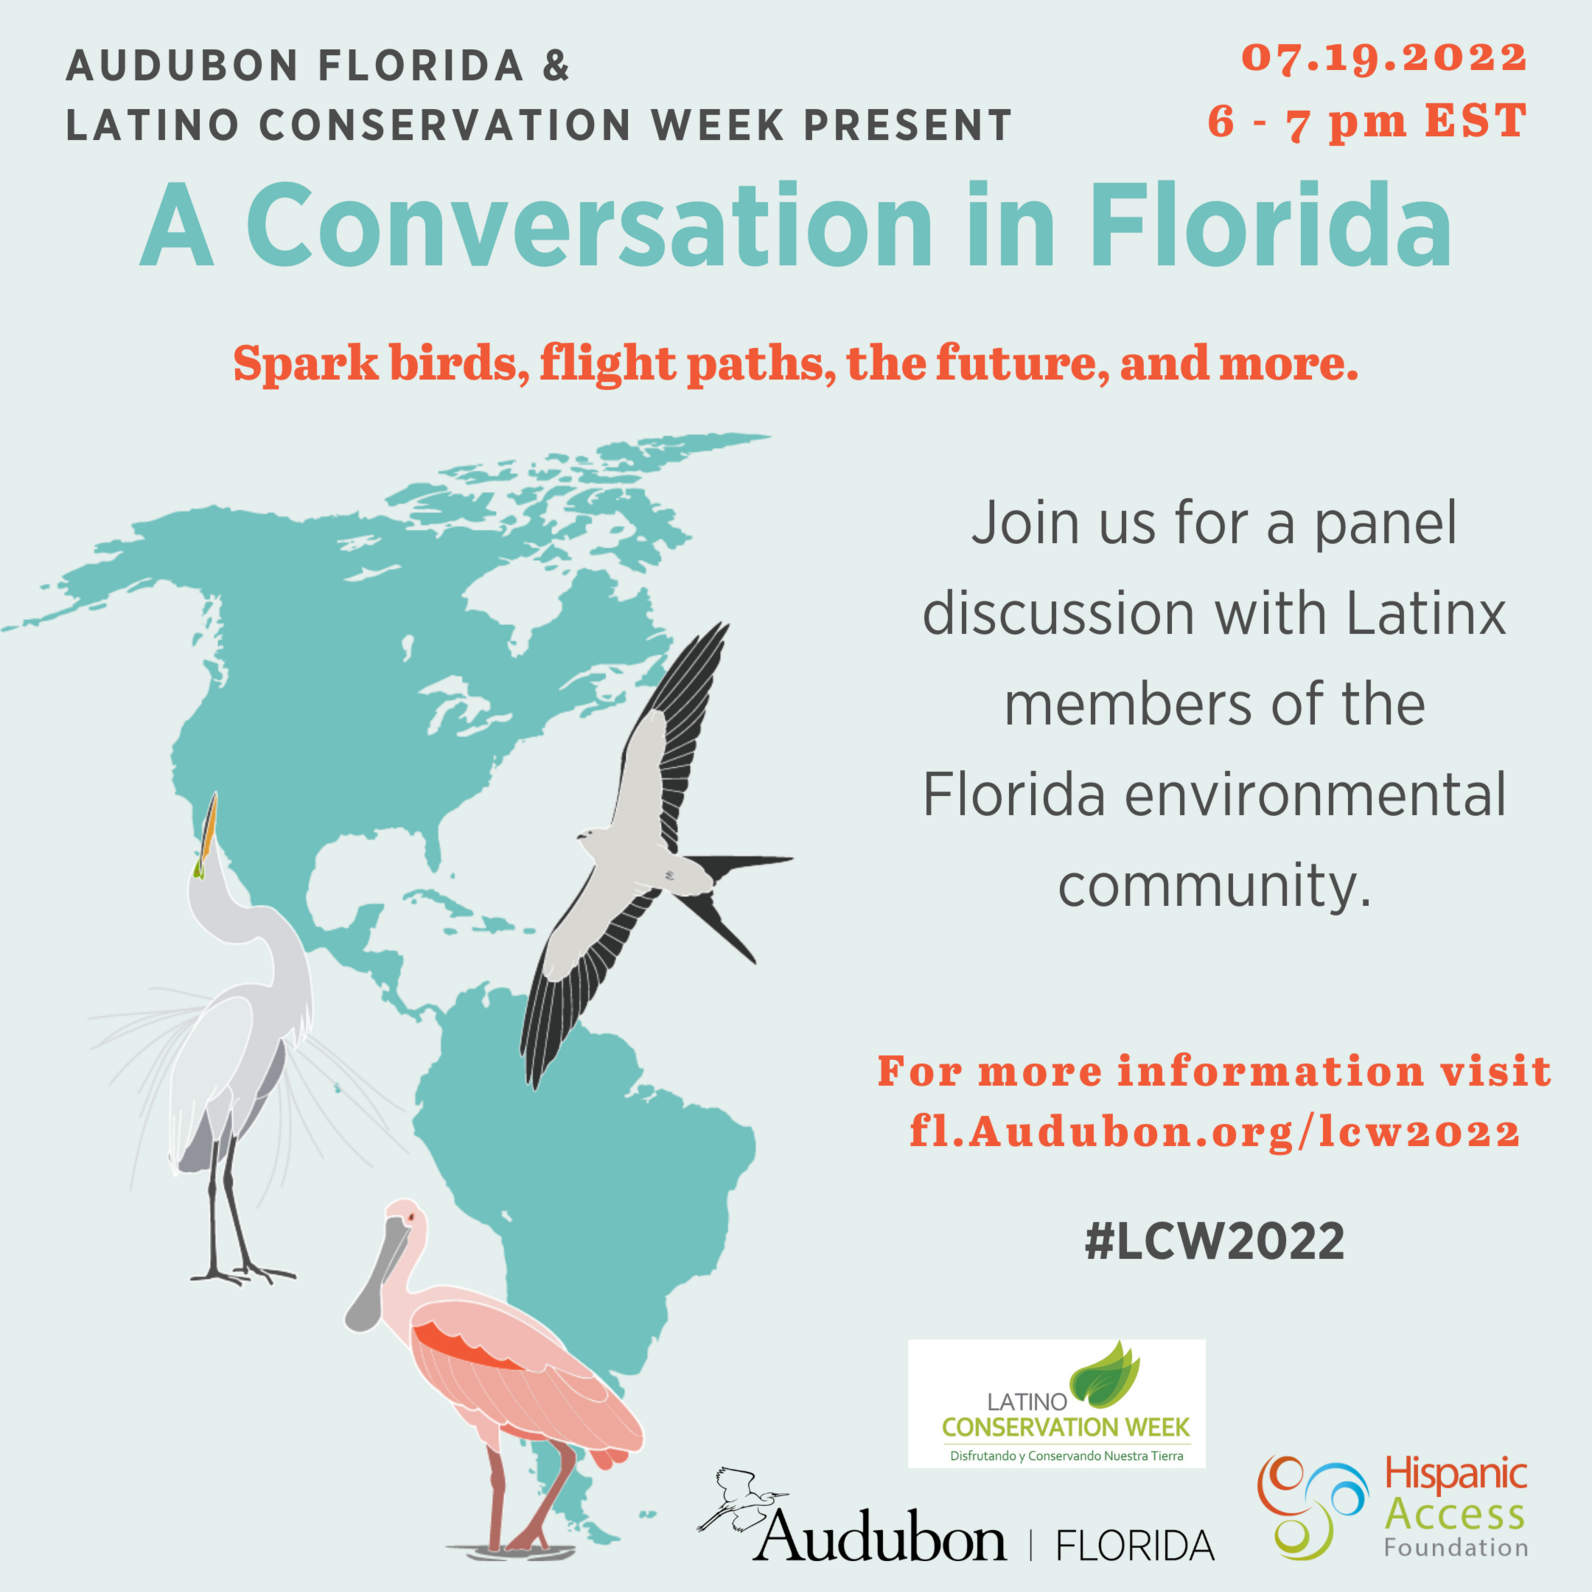 A graphic depicting the Latino Conservation Week panel discussion. Join us for a panel discussion with Latinx members of the Florida environmental community. July 19 from 6-7 pm.